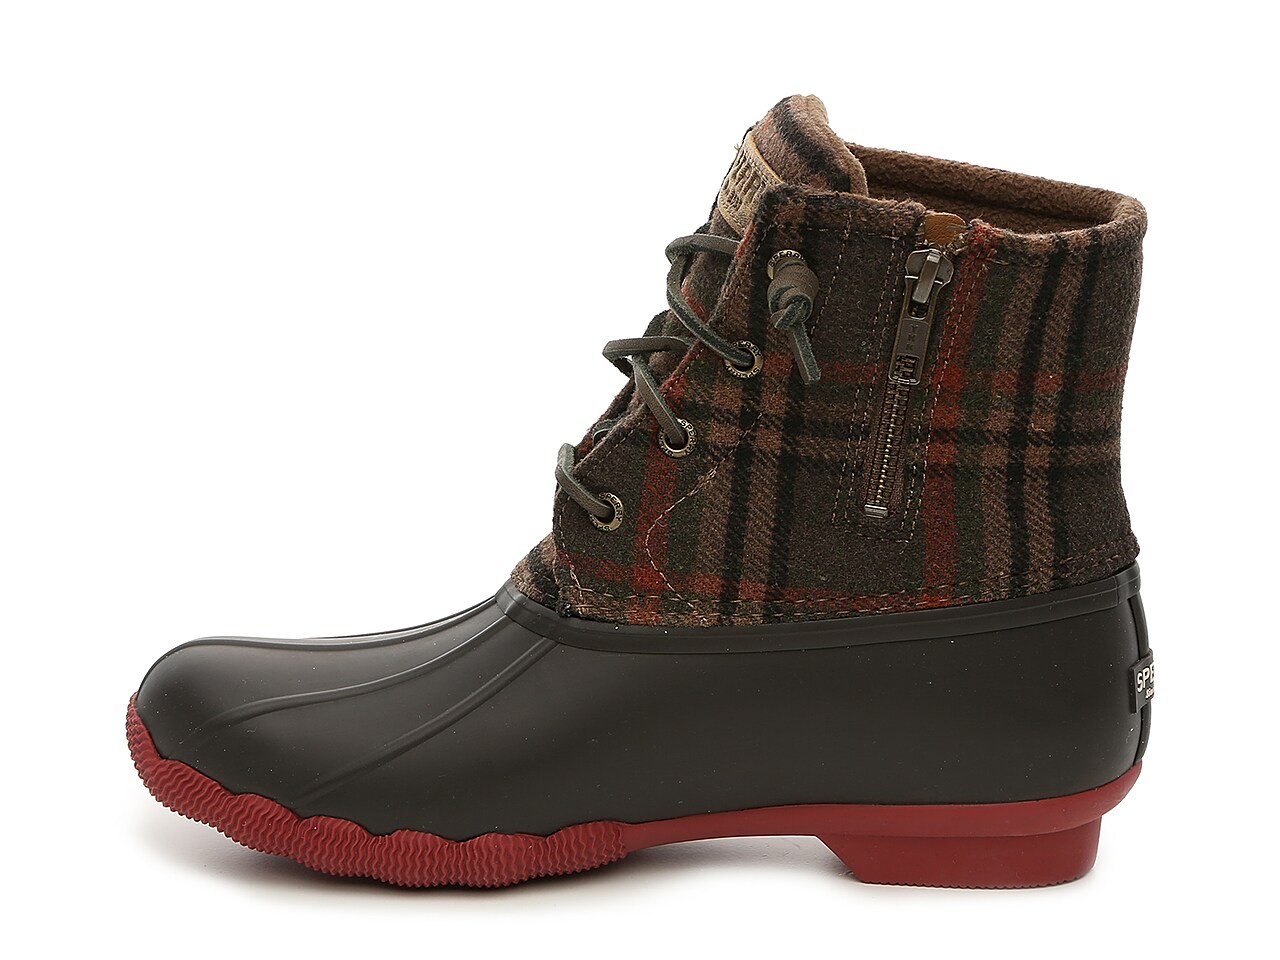 Sperry Saltwater Plaid Duck Boot | DSW